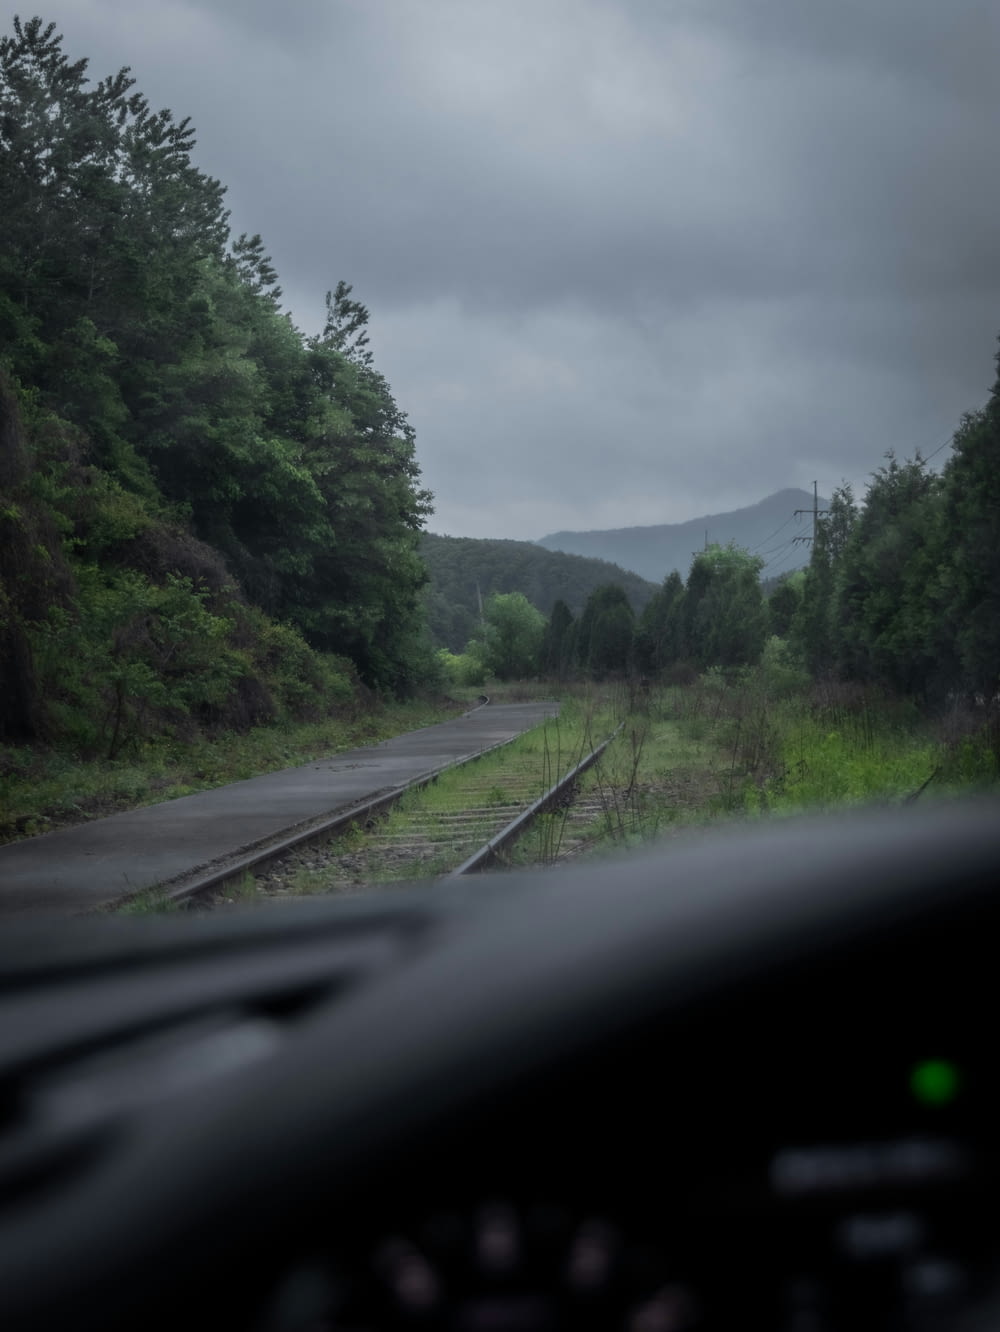 a view of a train track from inside a car